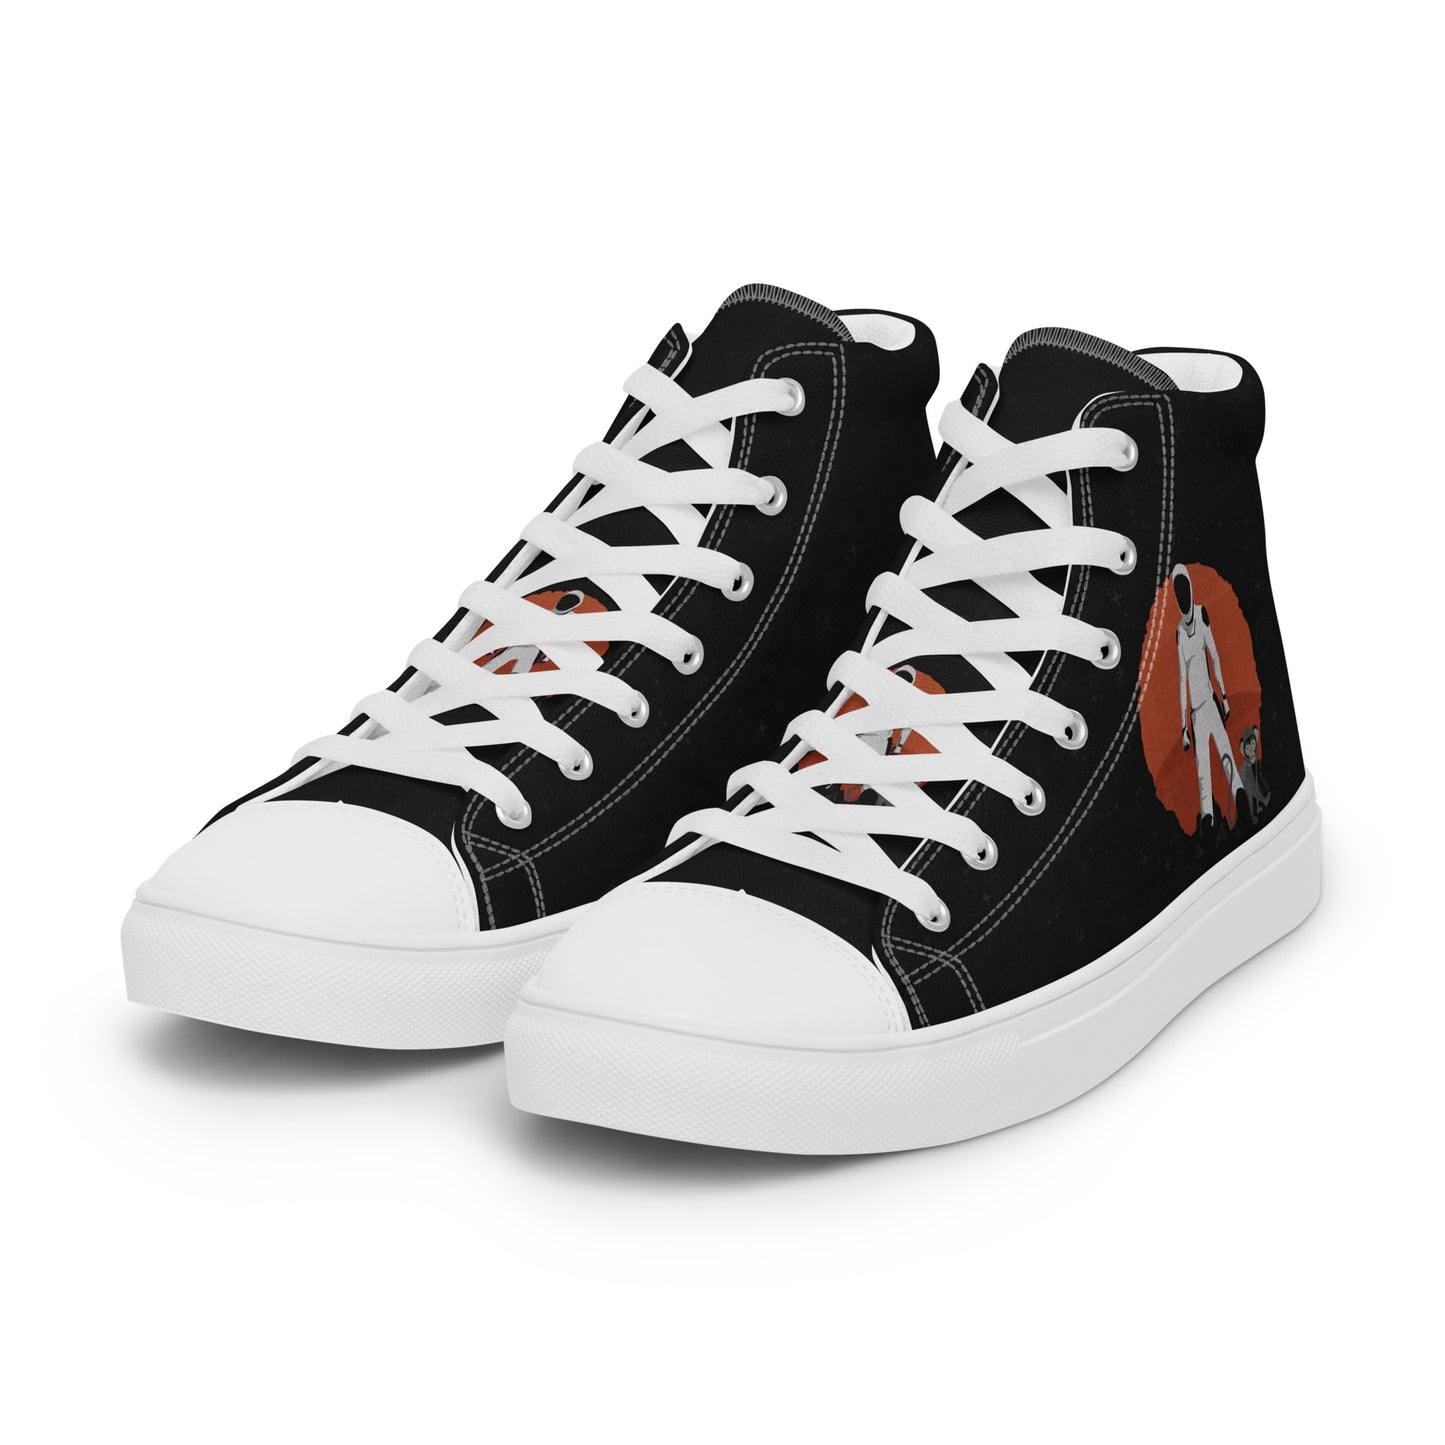 Men's Beyond Mars Edition High Top Sneakers - LuminoPlace